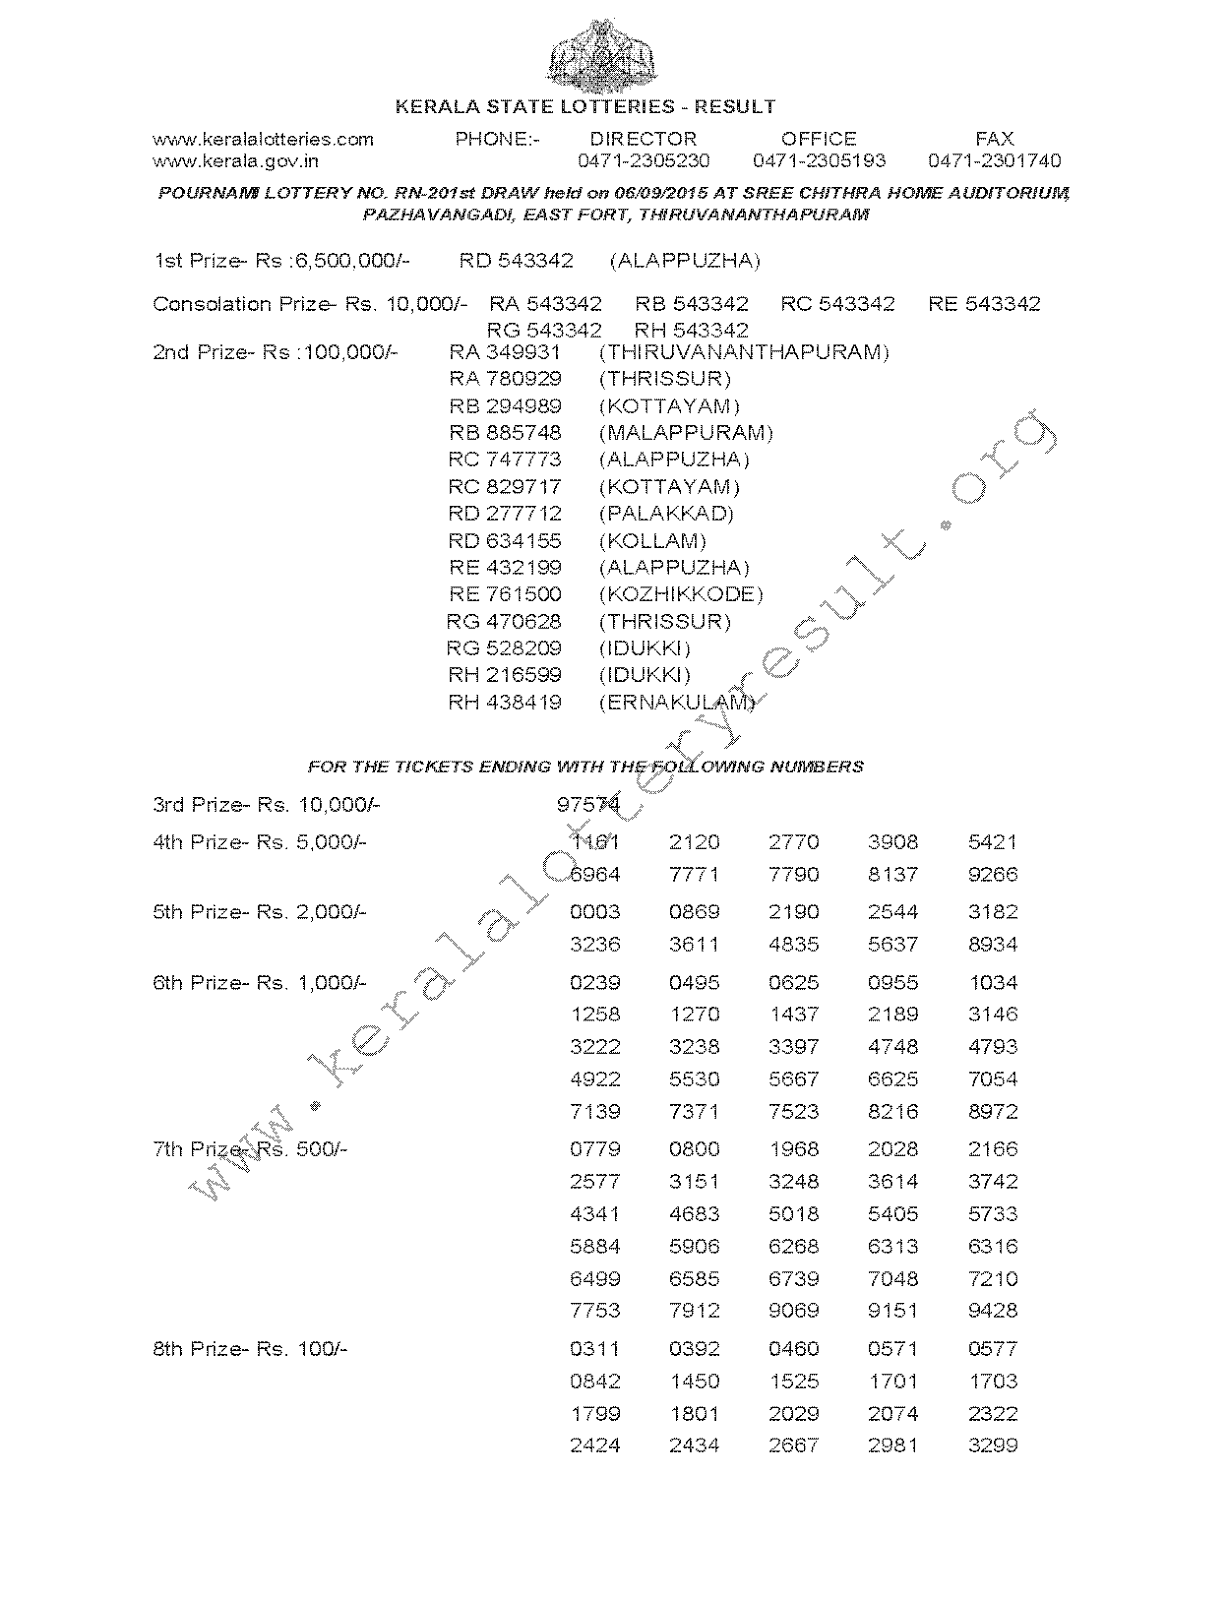 POURNAMI Lottery RN 201 Result 6-9-2015